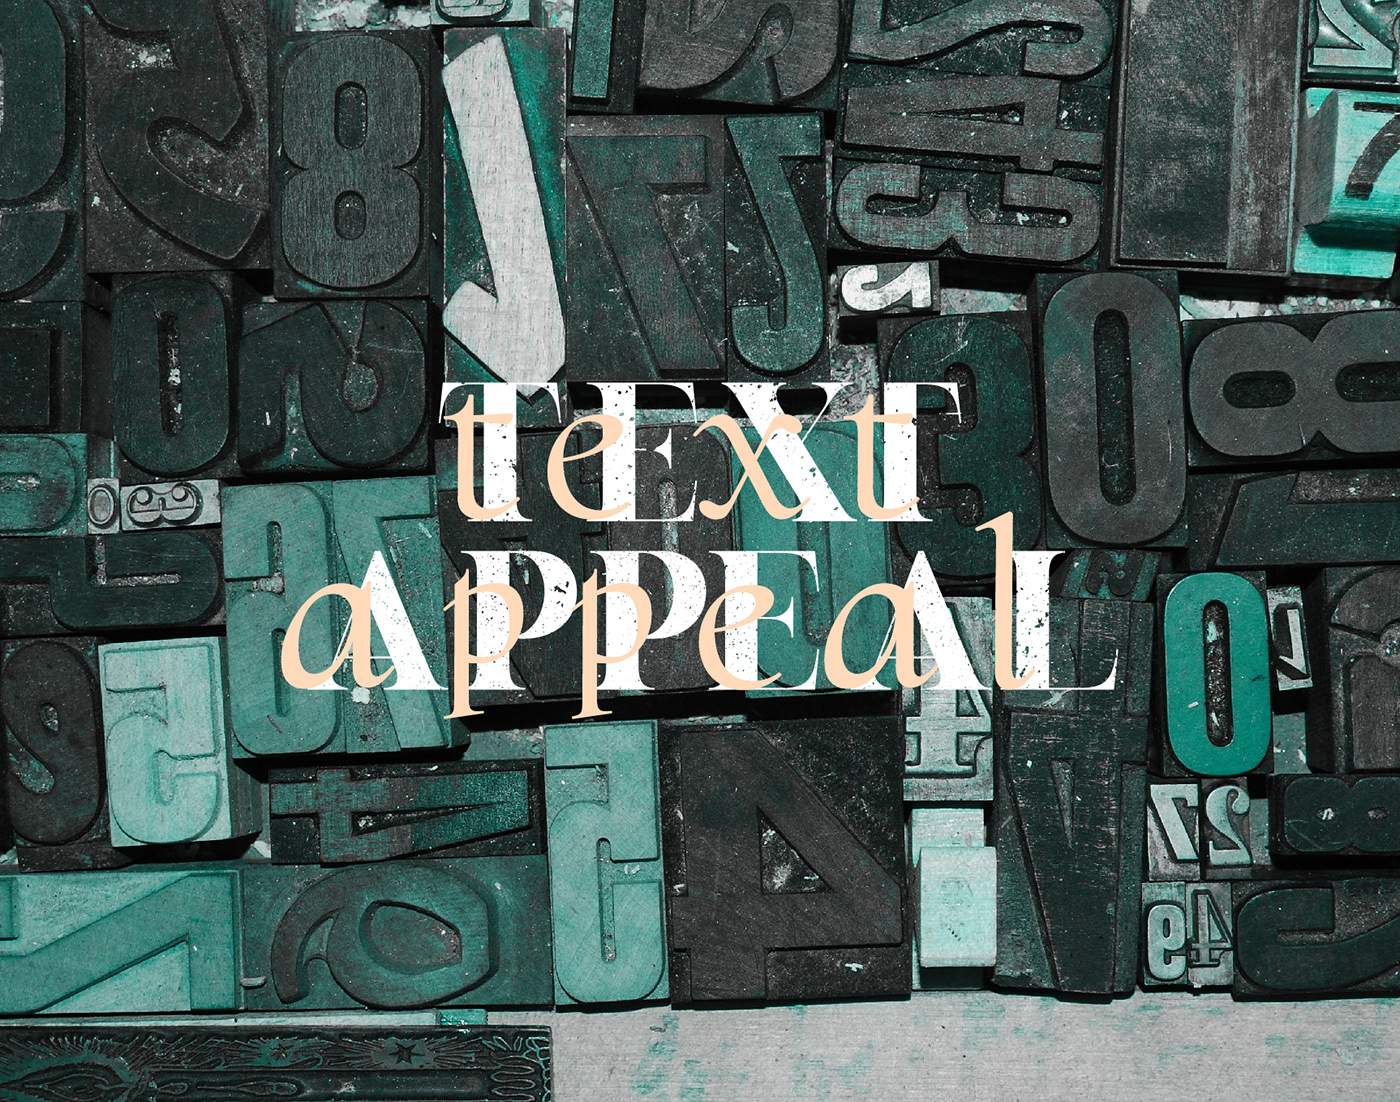 This image represents the Text Appeal project focused on typography and orthotypography.